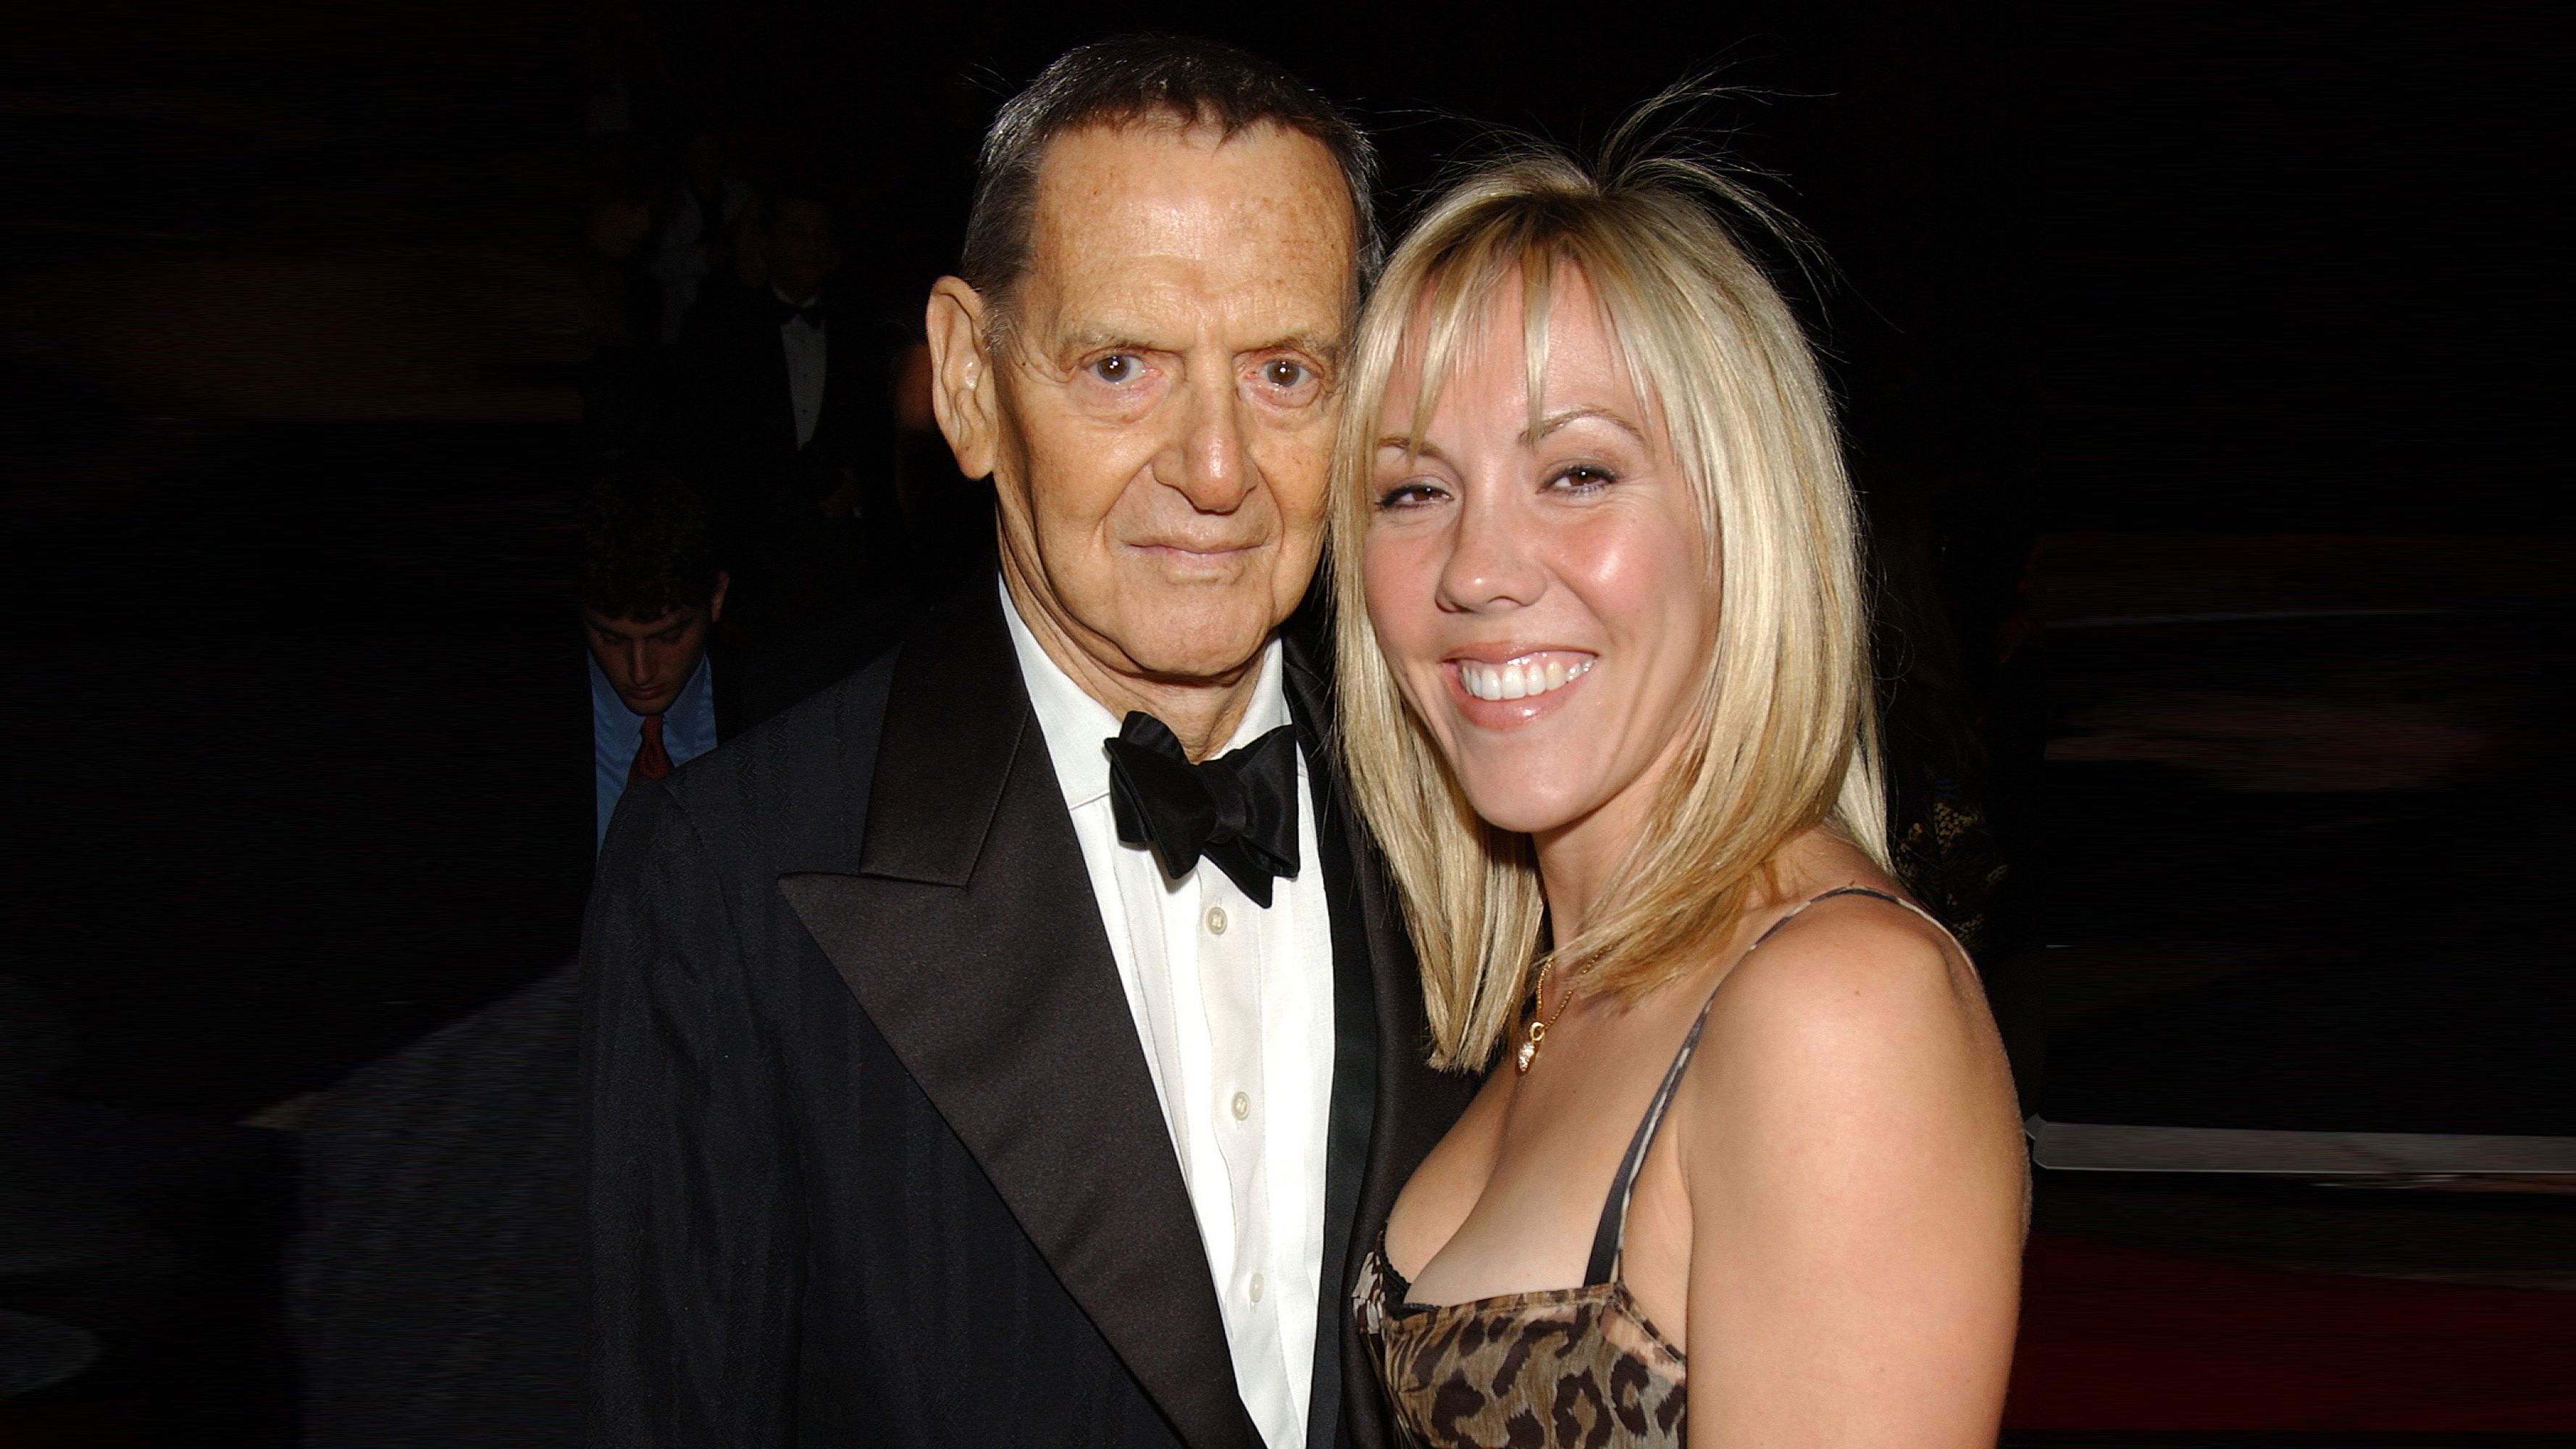 Heather Randall, Wife of Tony Randall The Marie Claire Interview Marie Claire image